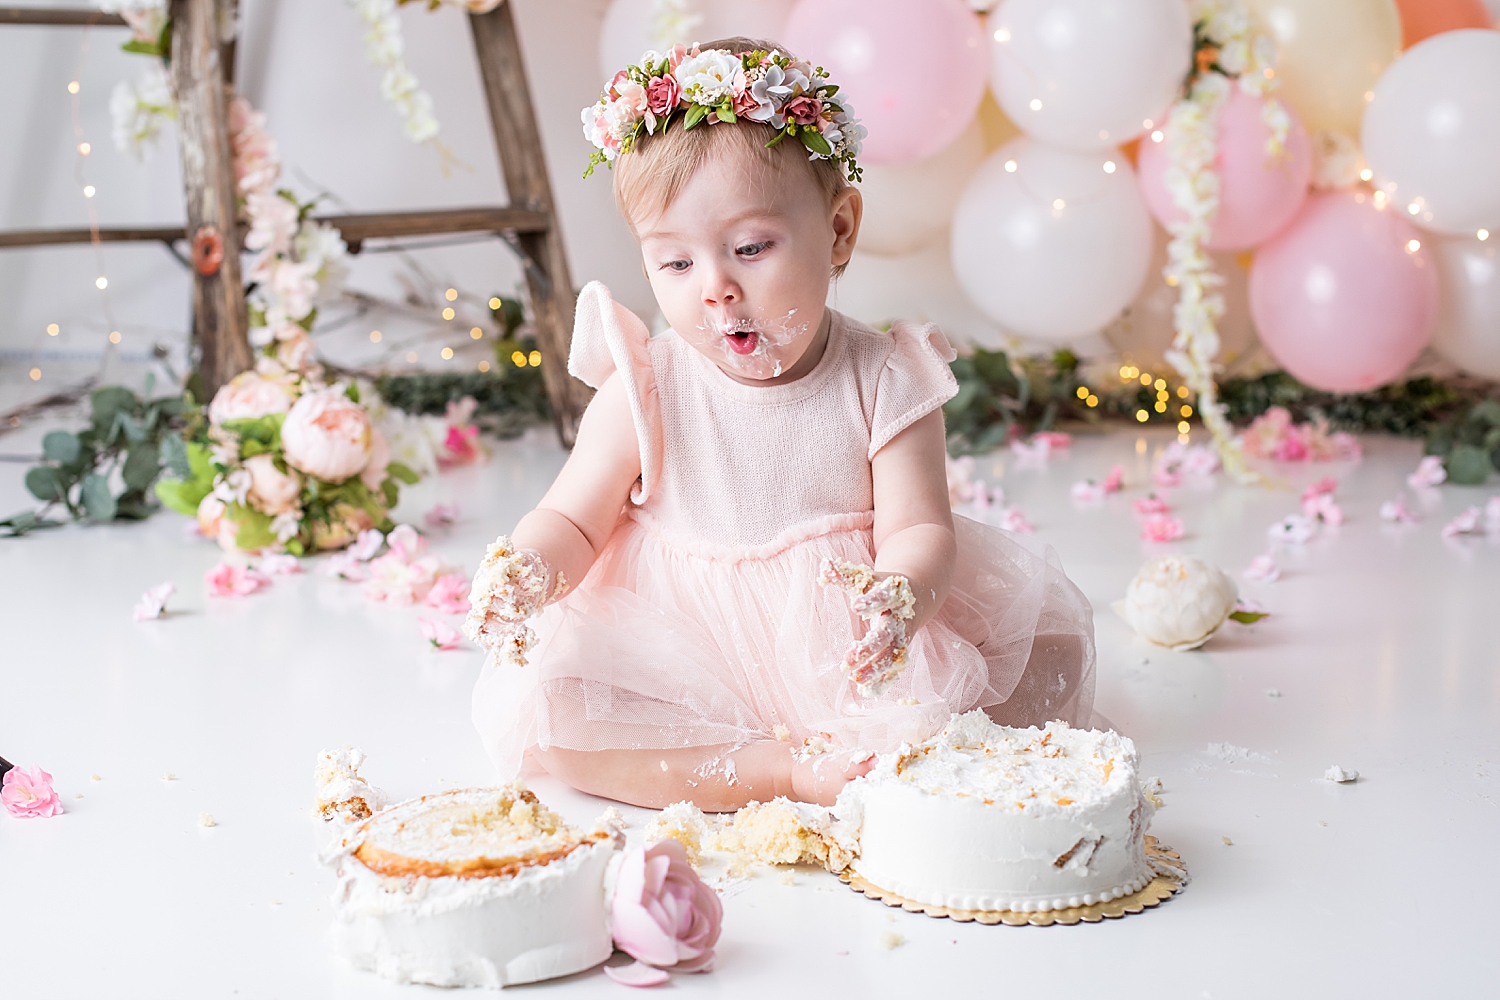 baby makes uh ohh face as she knocked cake over